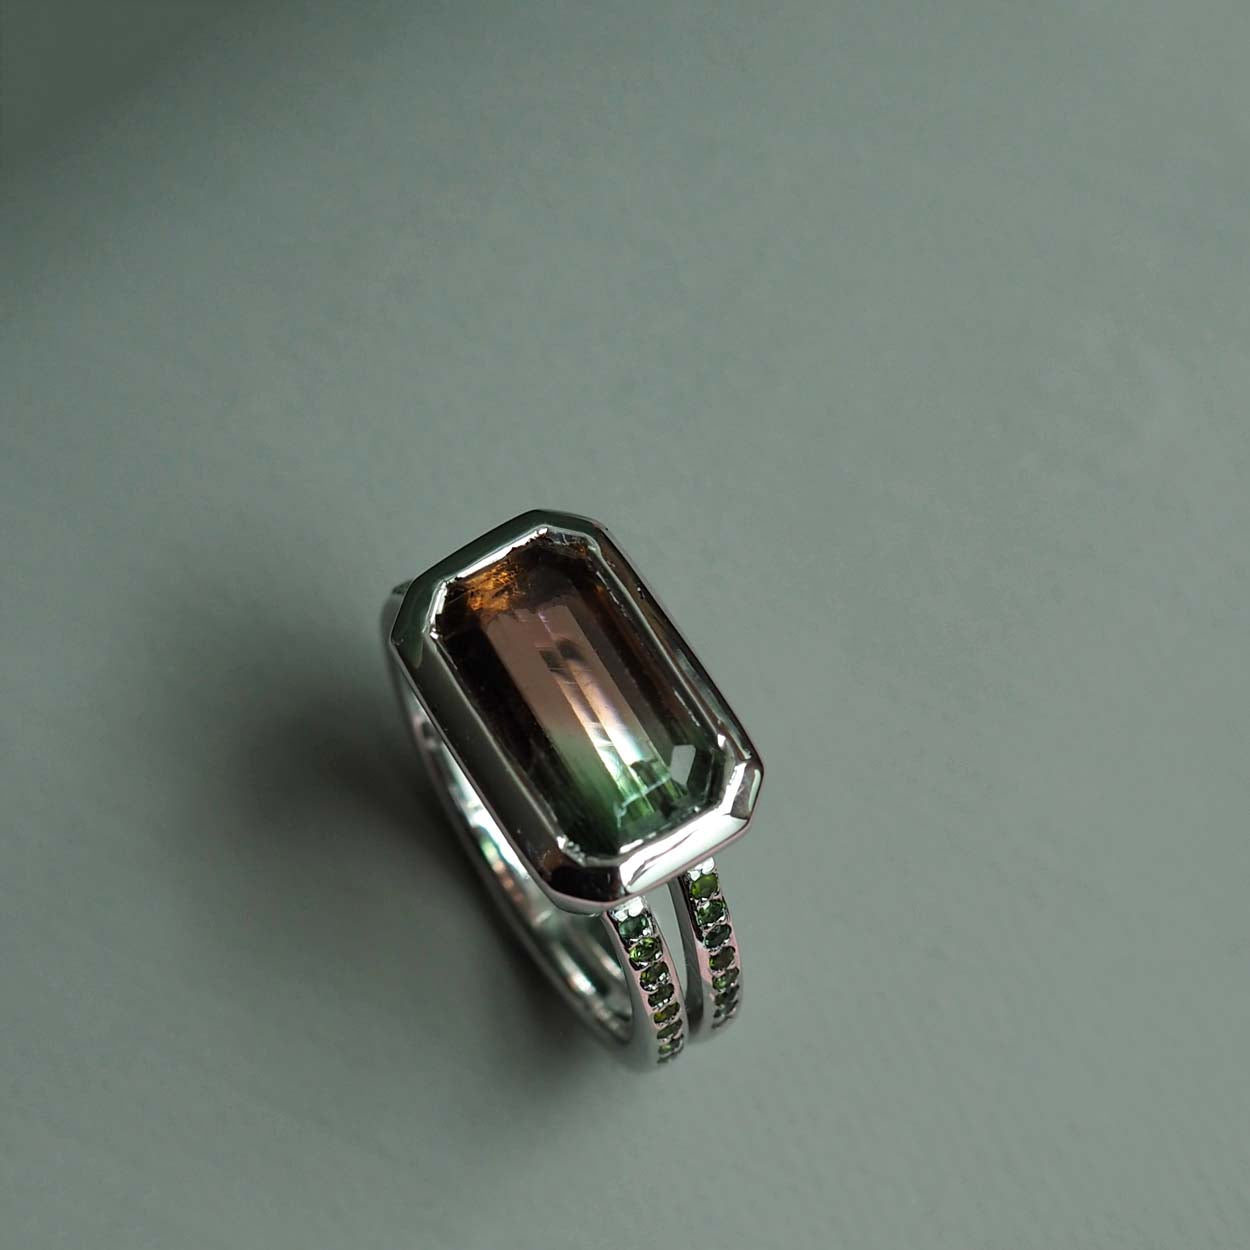 Bianca Jones Watermelon Tourmaline Engagement Ring in Recycled White Gold with Green Tourmaline Accents and Rub-Over Setting